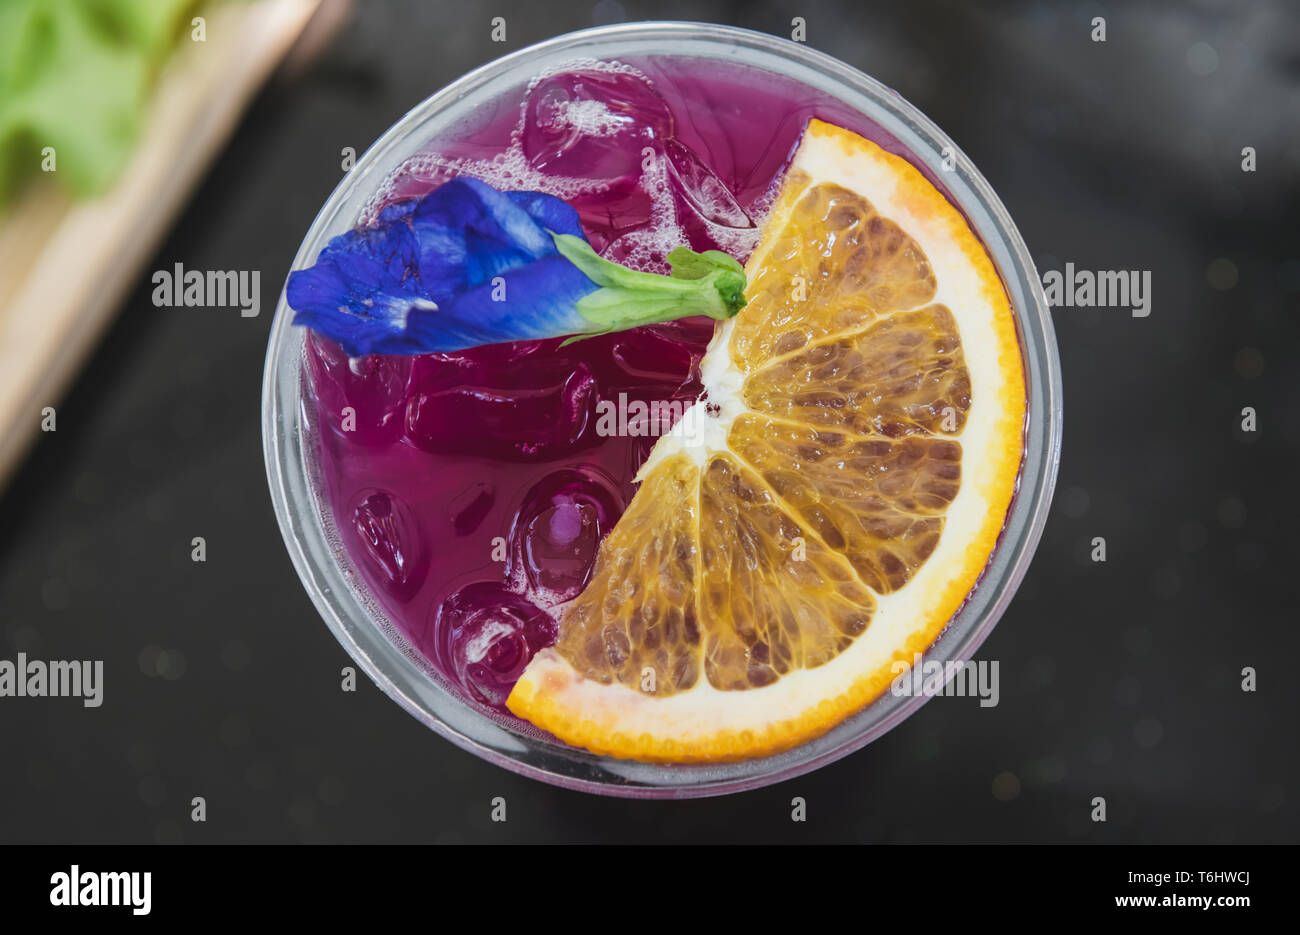 Ice cold sweet berry fruit drink  with outdoor sunset lighting. Stock Photo